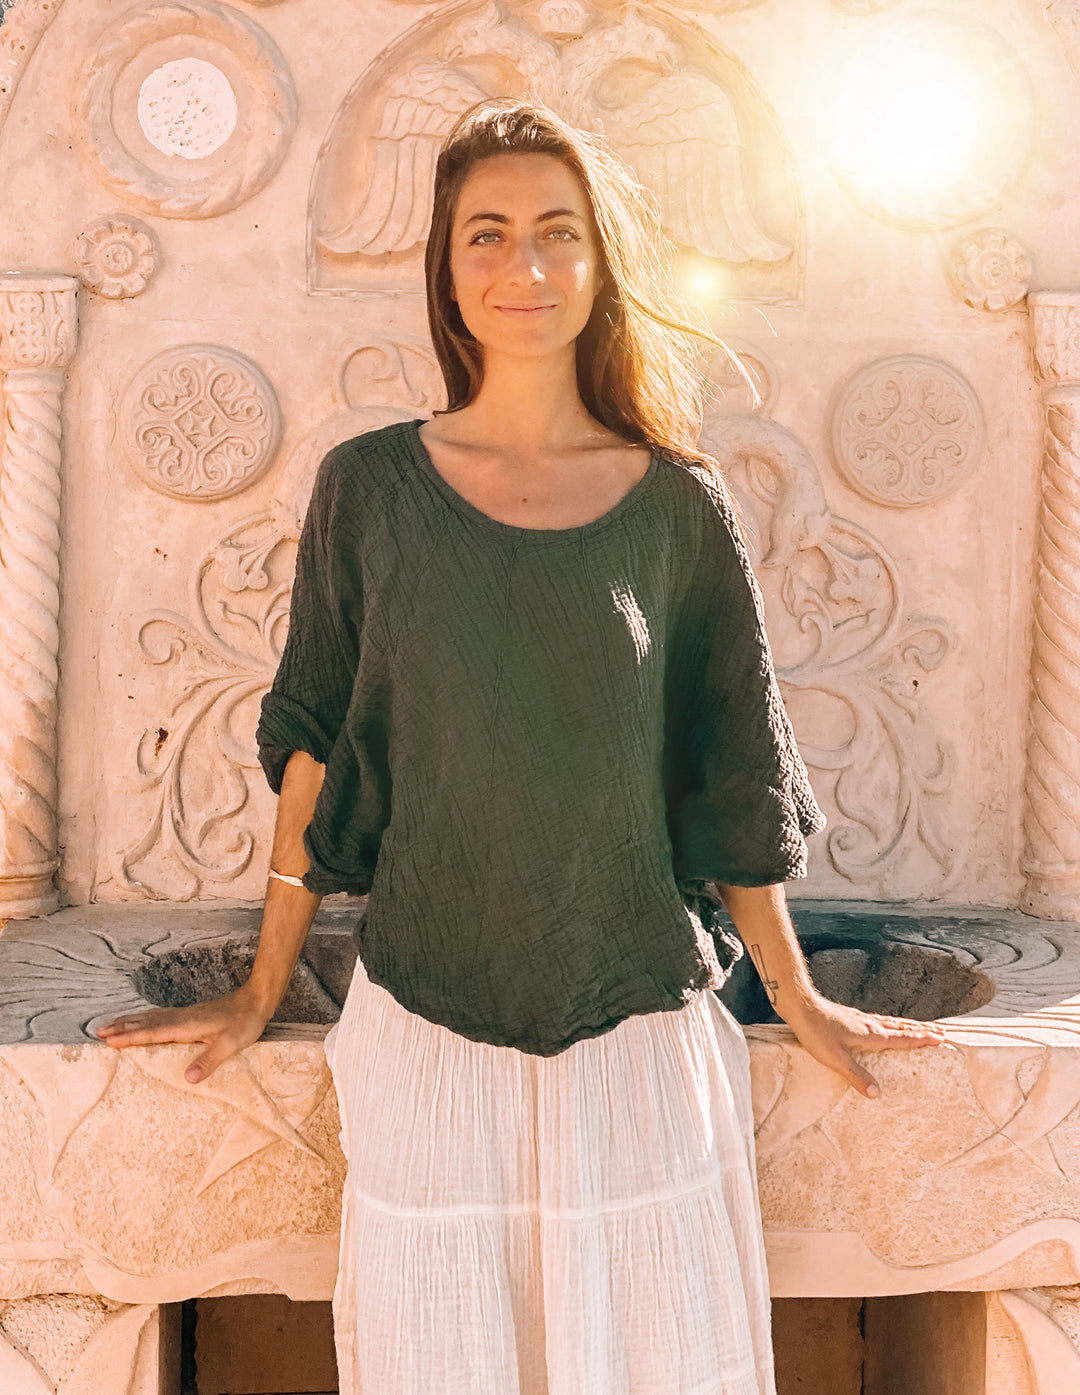 Woman has on green poncho top with white skirt